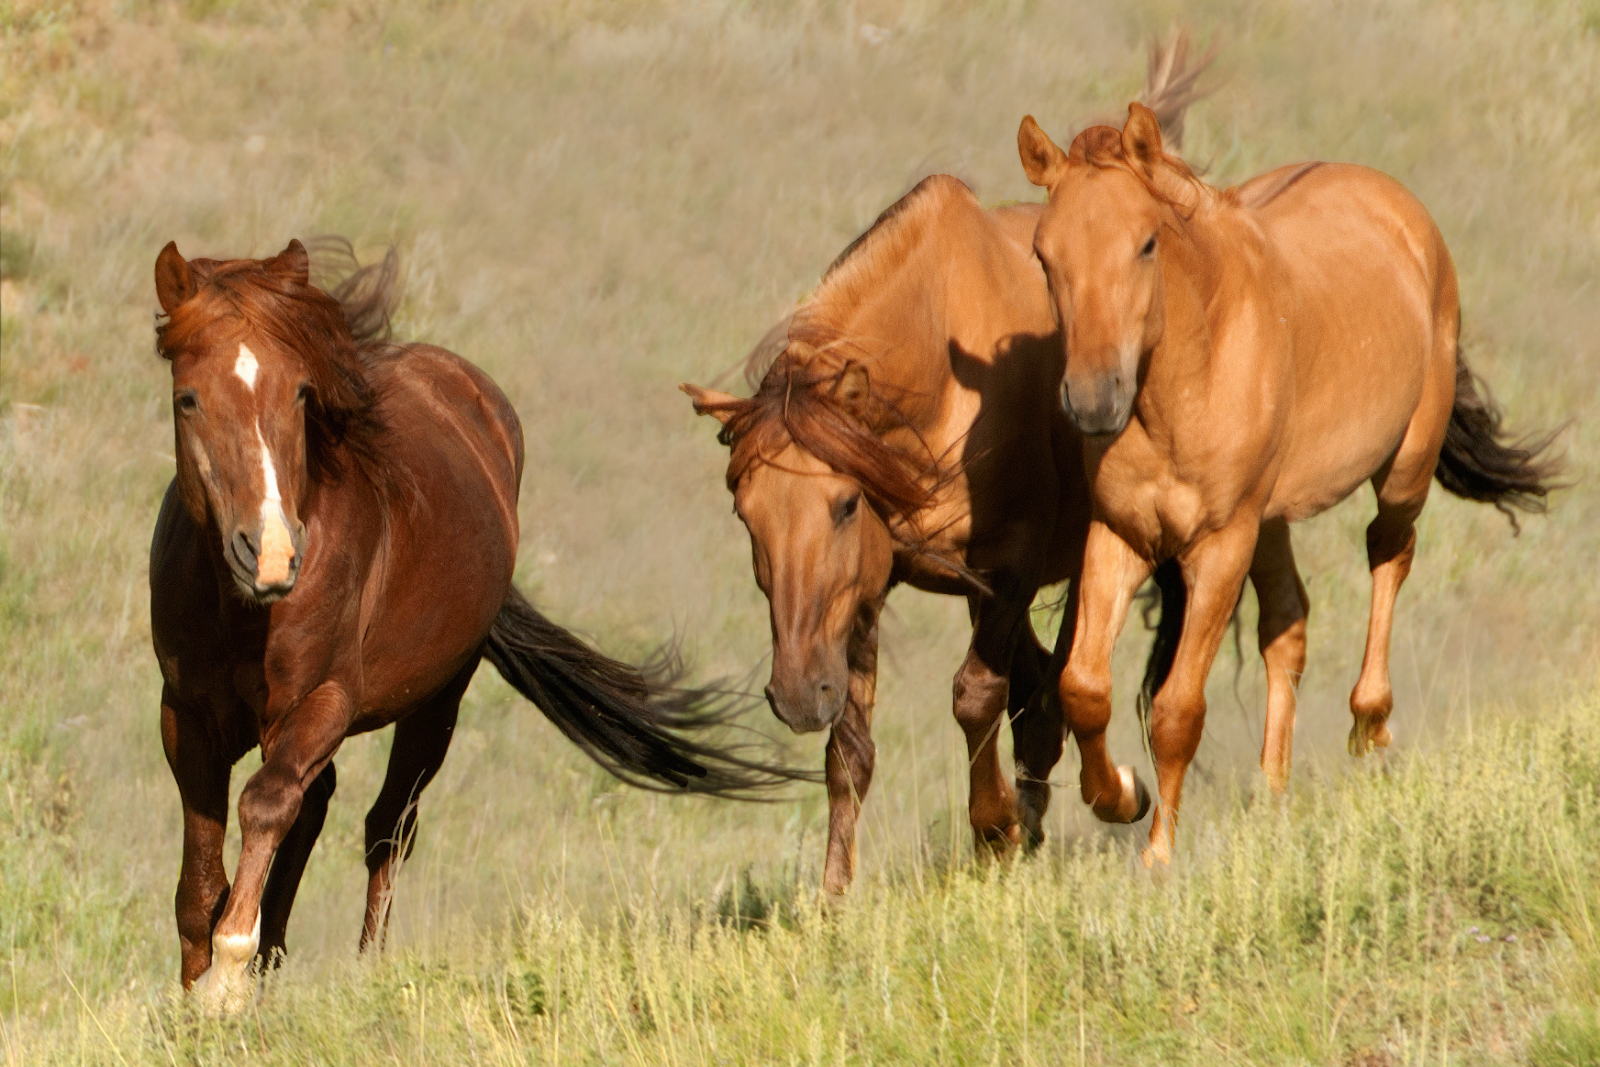 3 wild horses roaming around the mountain: they are perfect for songs about wild horses!